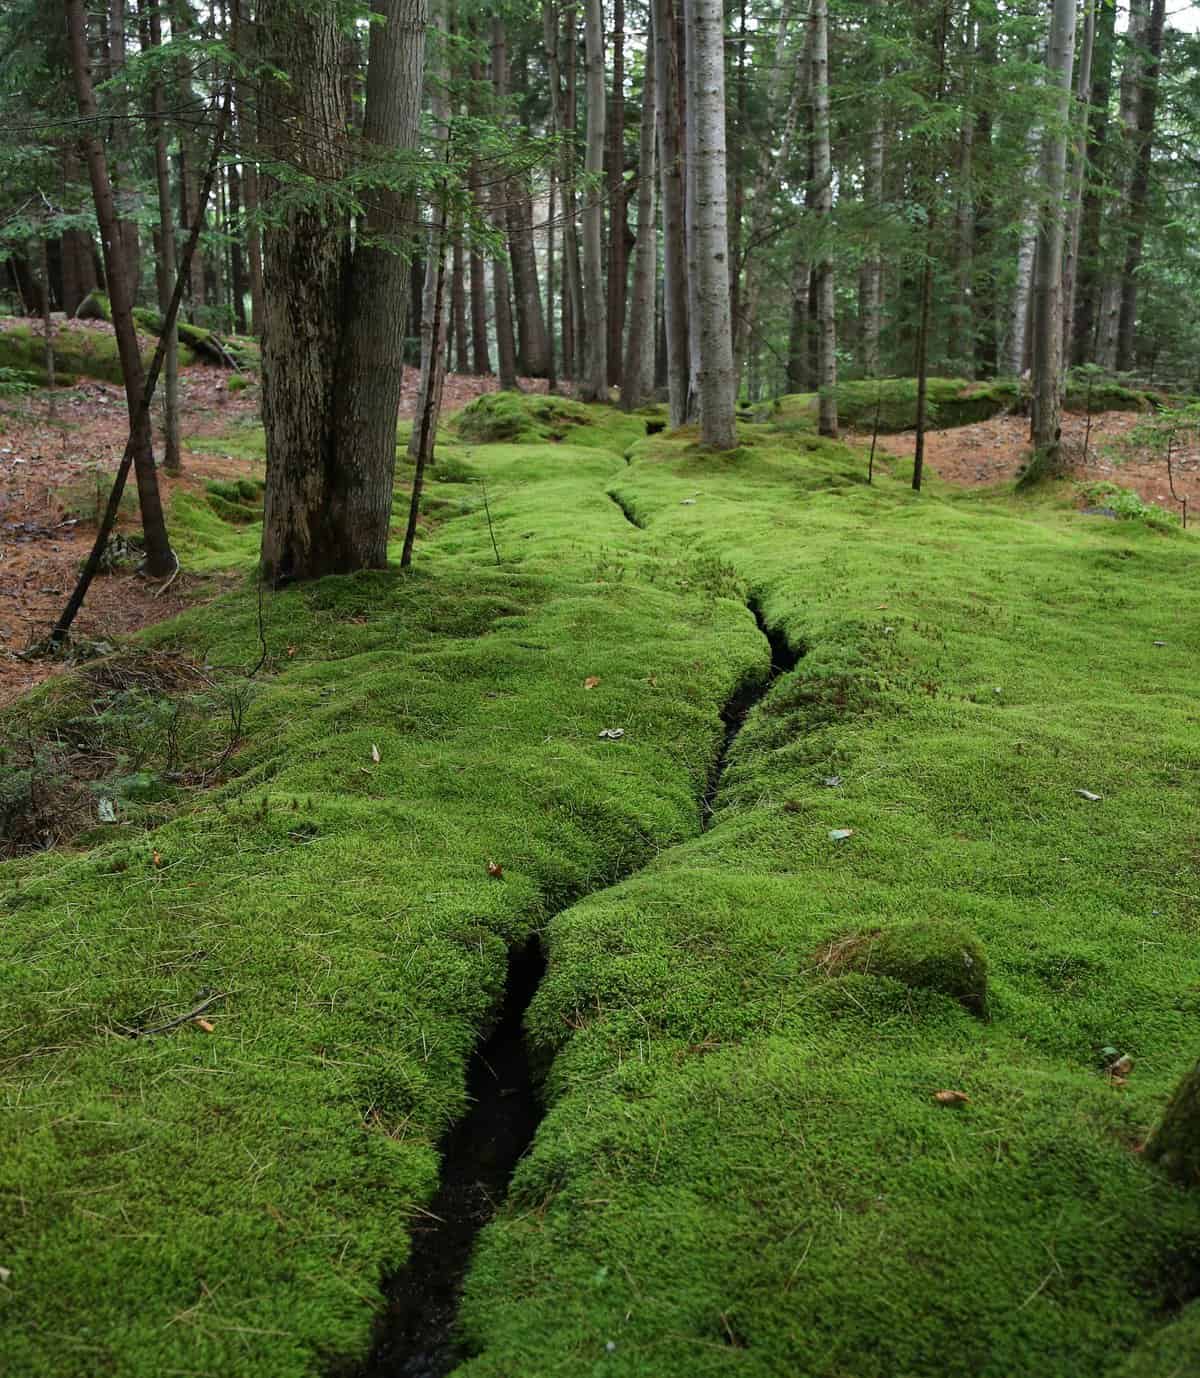 A narrow trench cuts through a moss-covered forest floor, surrounded by tall trees with a mixture of green and brown foliage.